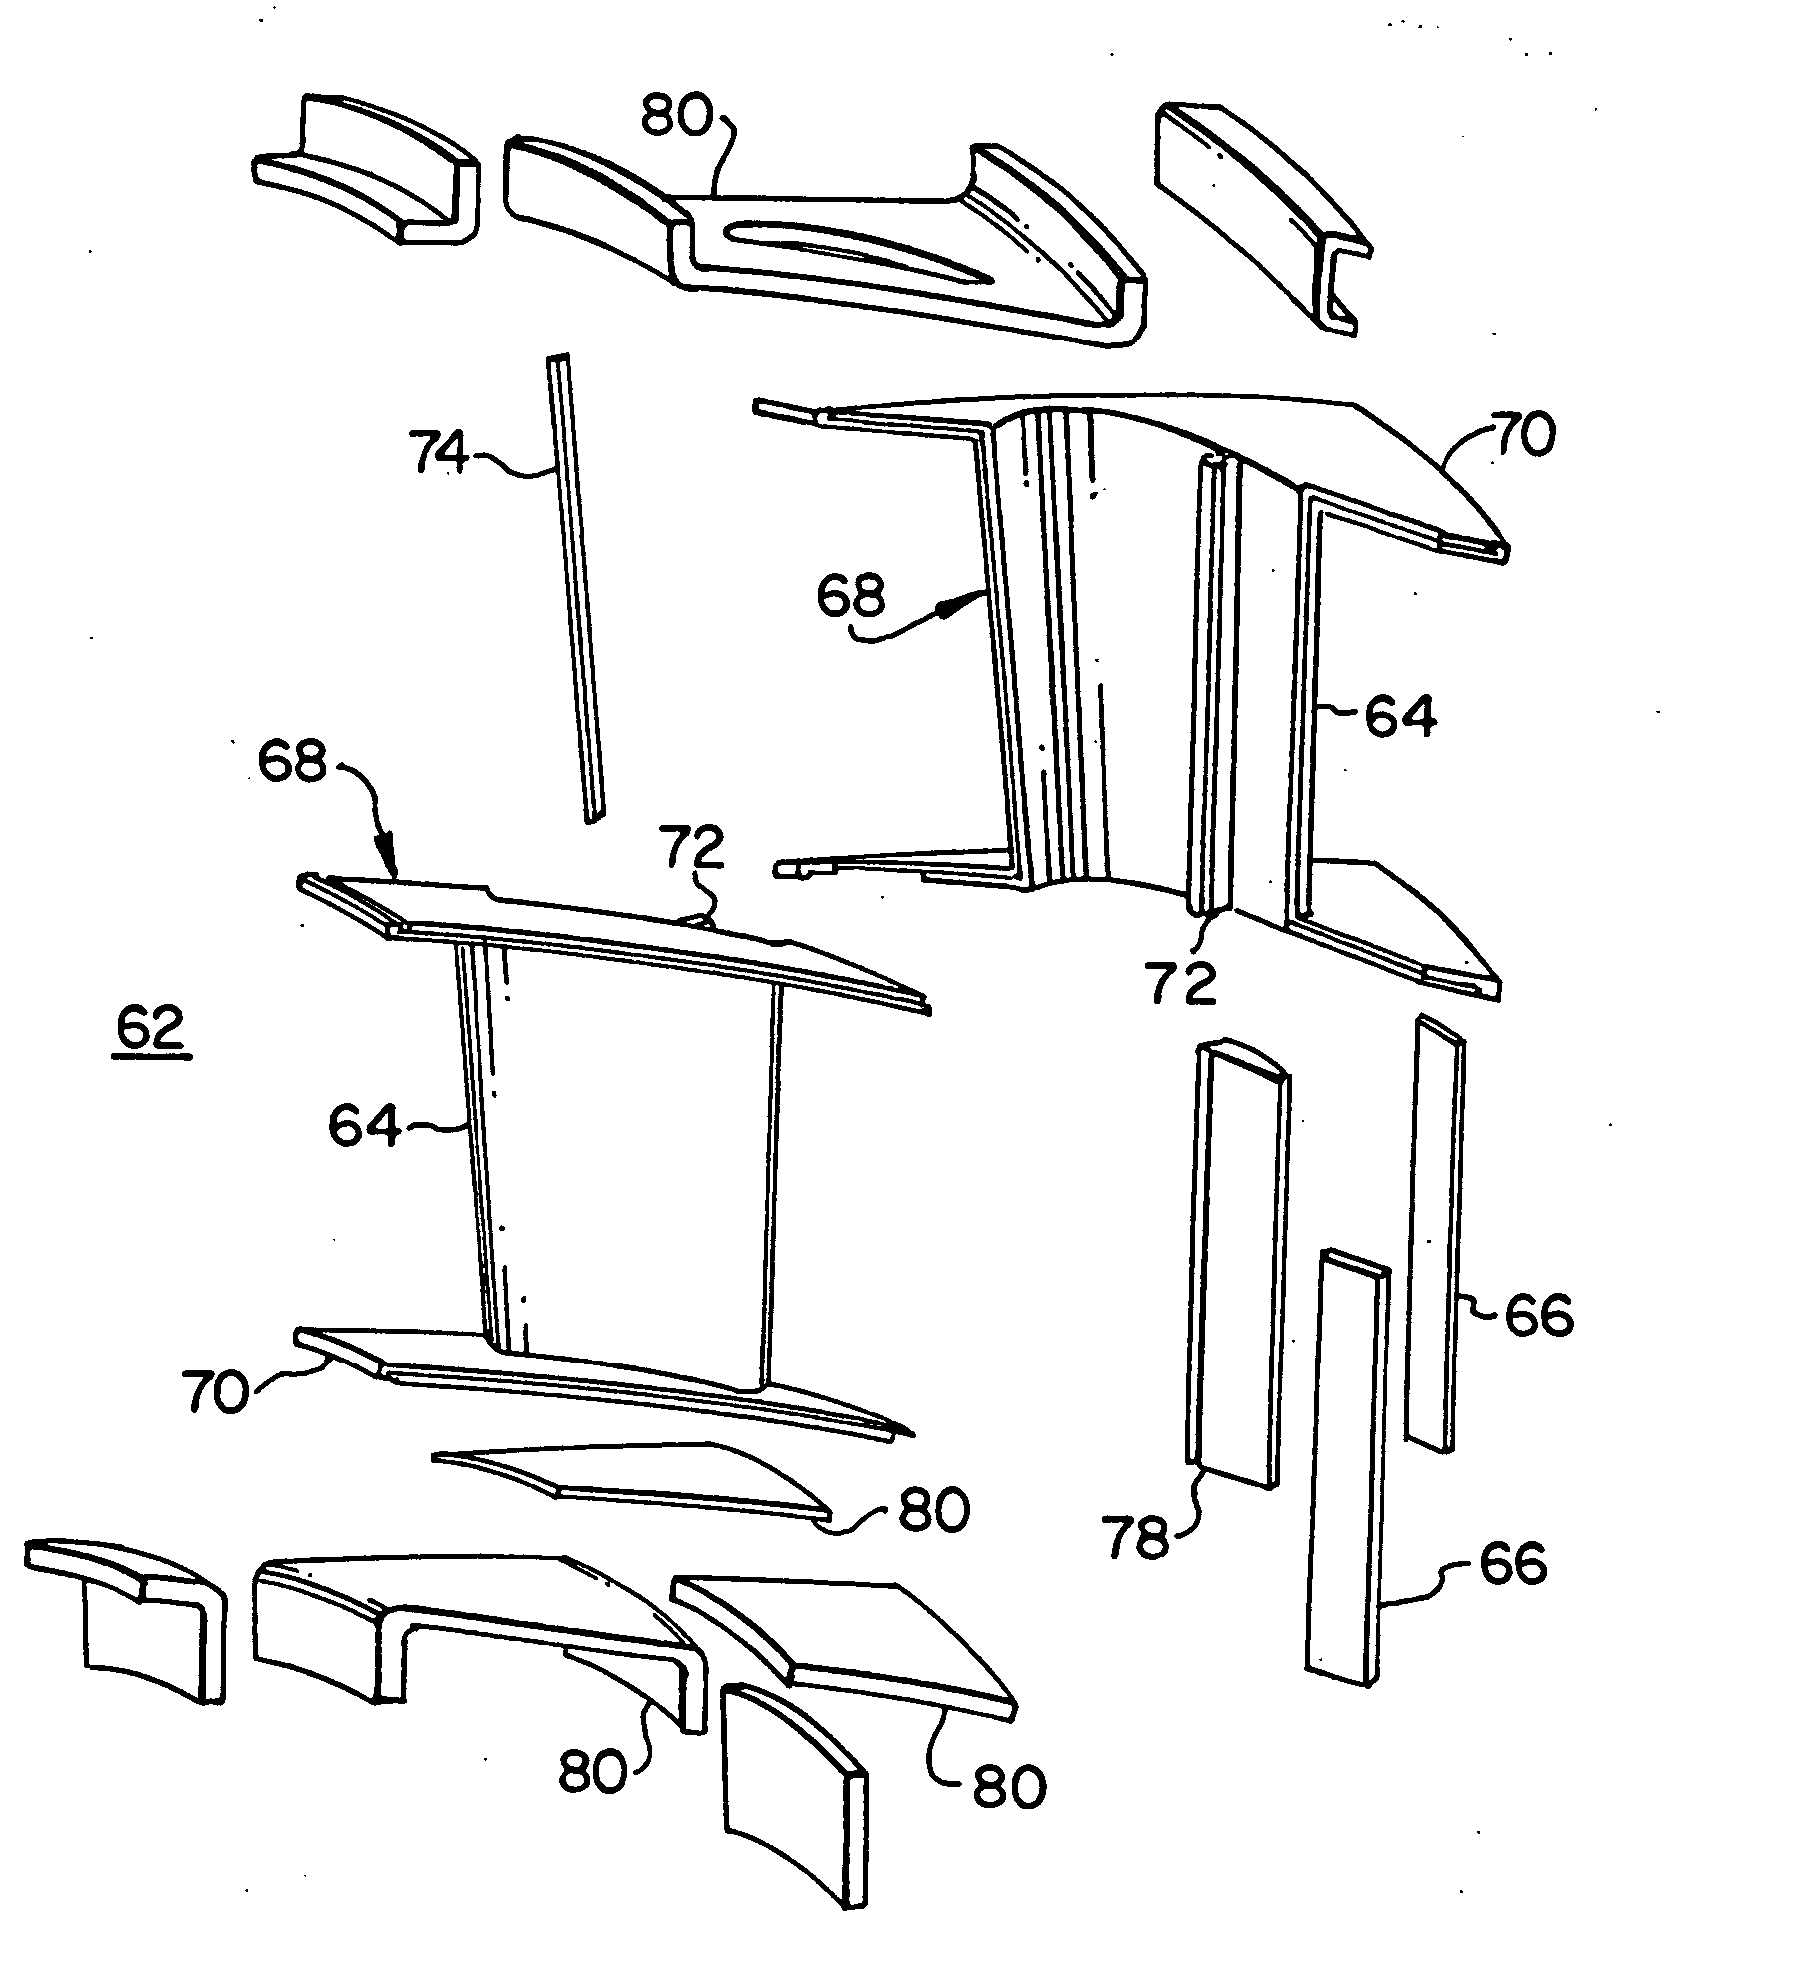 Composite structure formed by CMC-on-insulation process